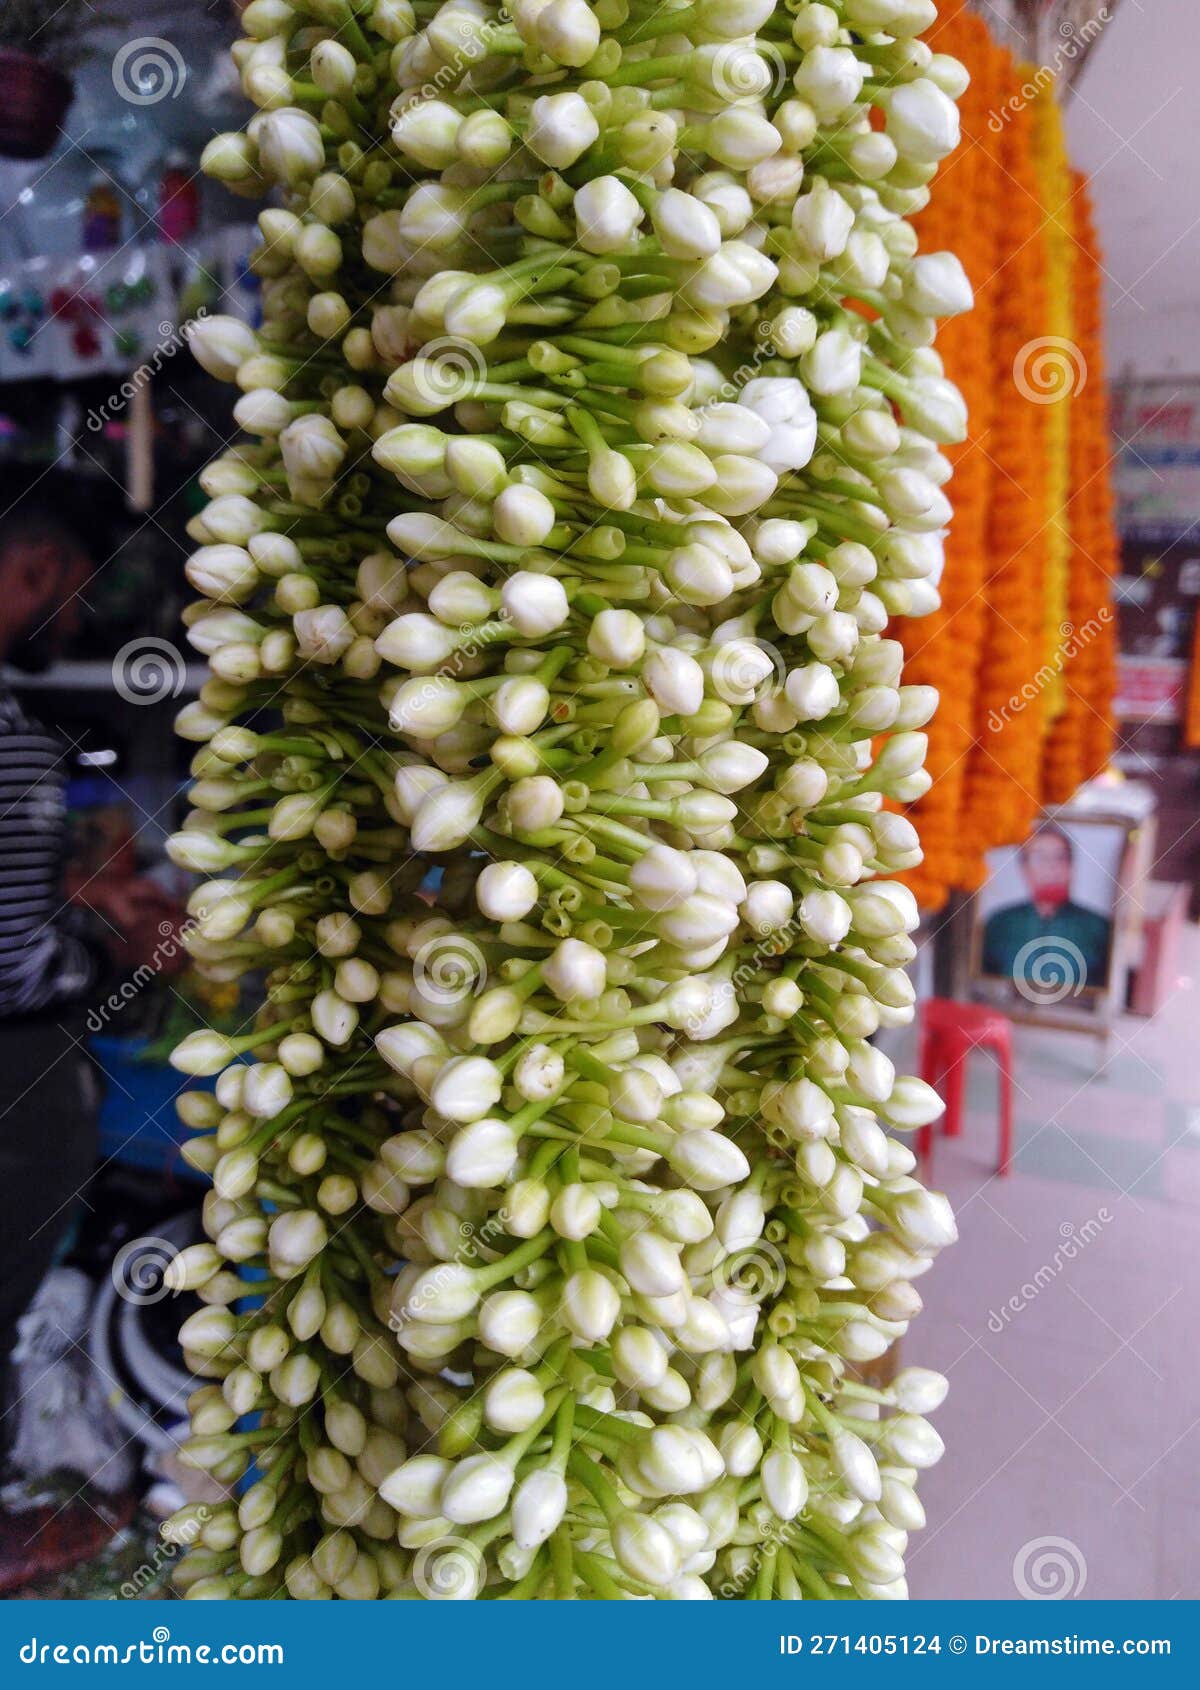 Details more than 150 gajra flowers for hair latest